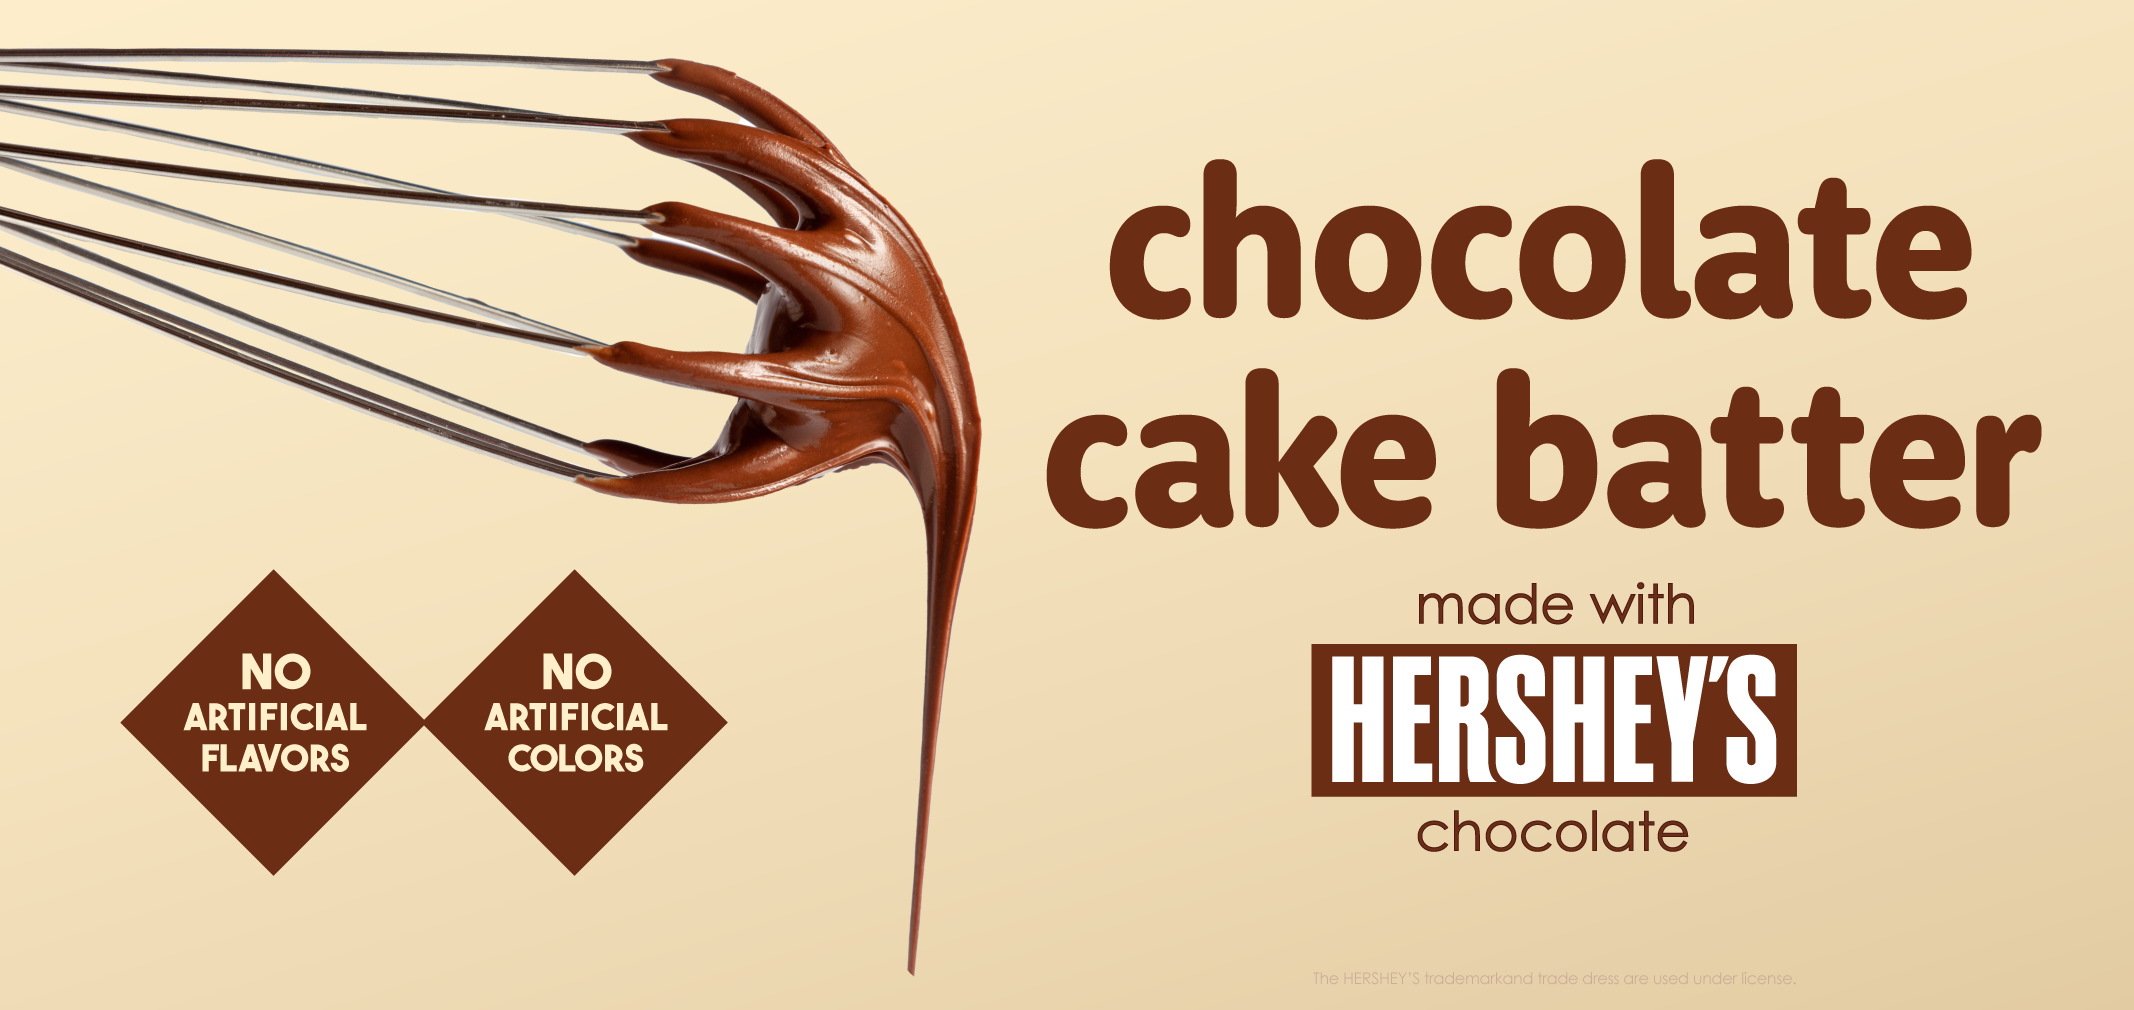 Chocolate Cake Batter made with Hershey's Chocolate label image